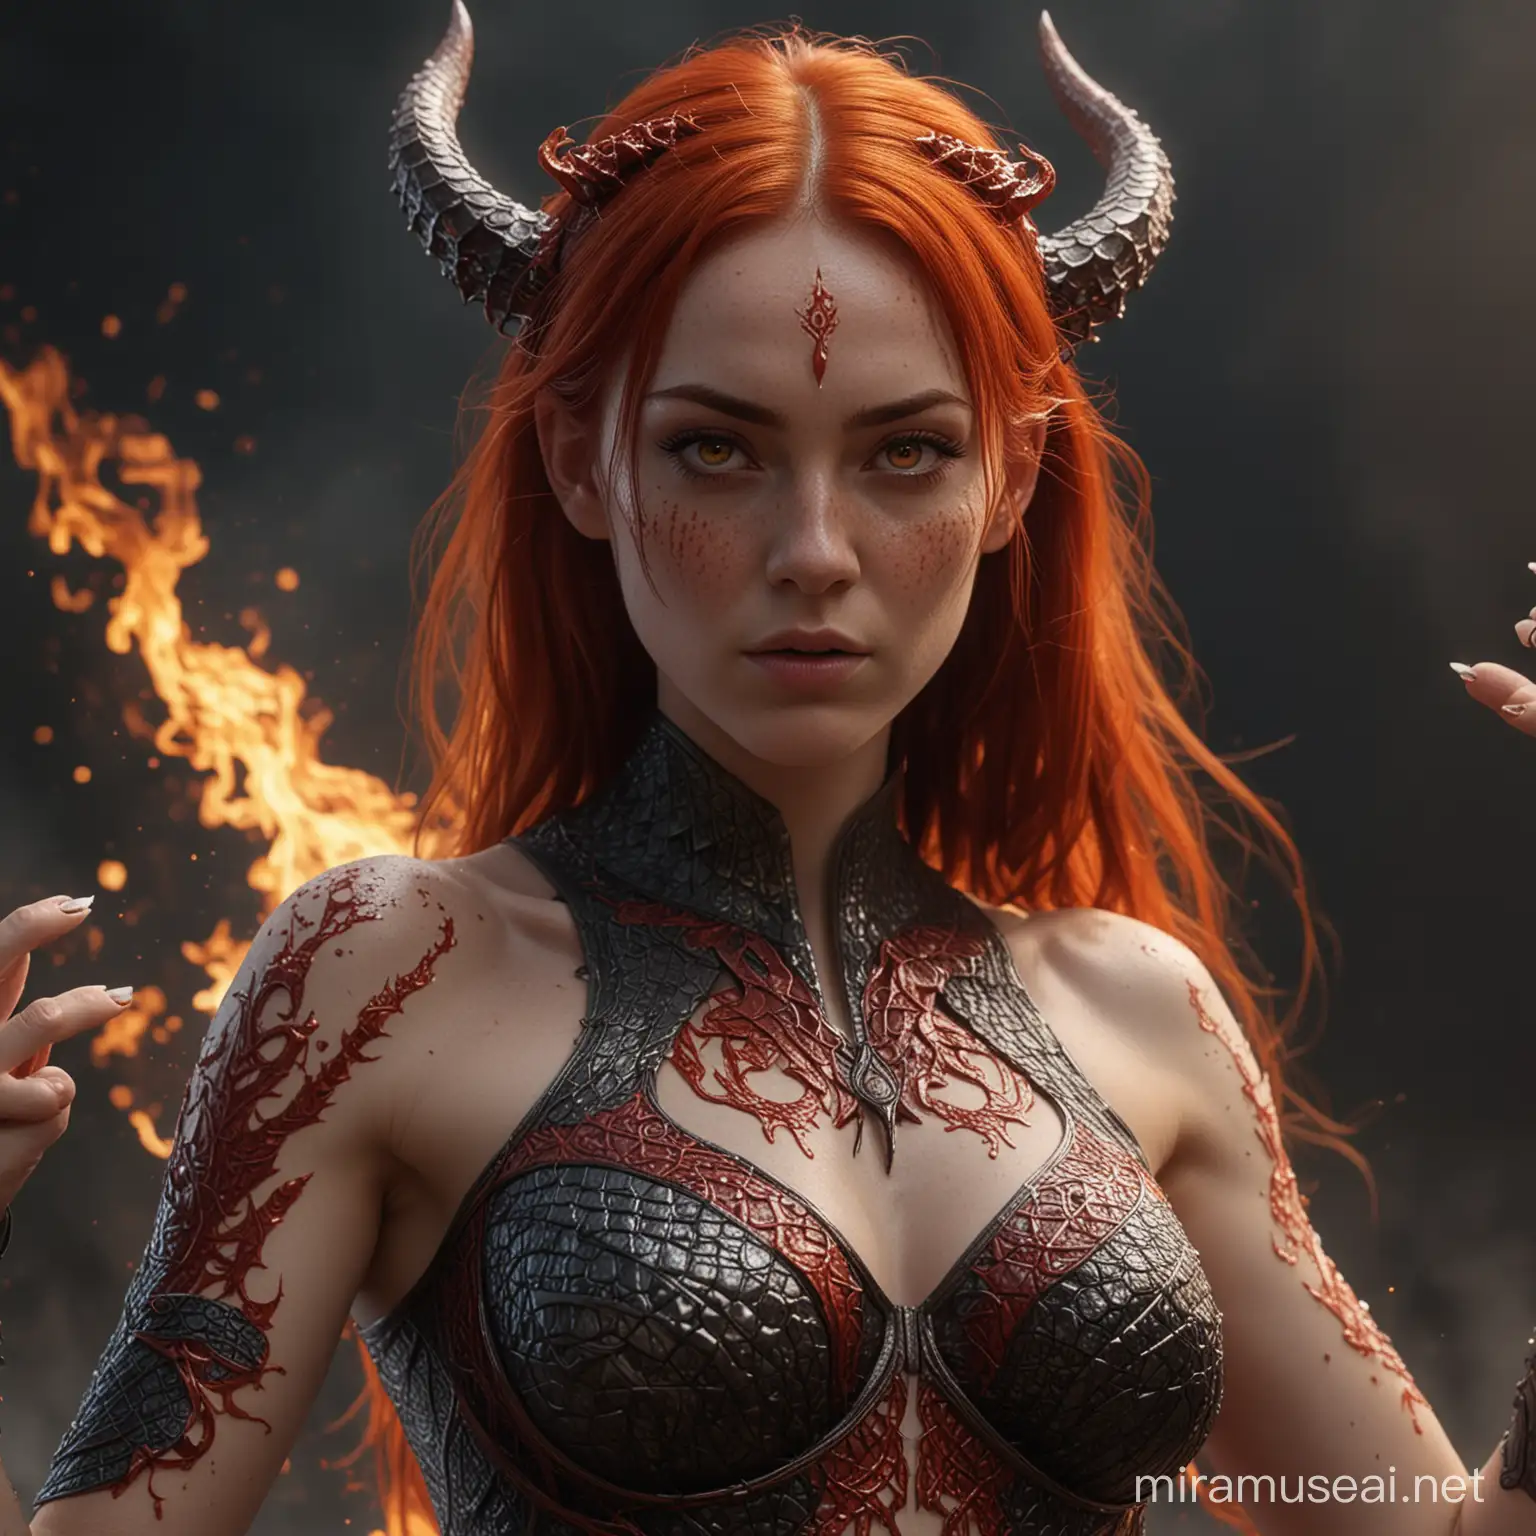 Fiery RedHaired Dragon Woman Casting Flames